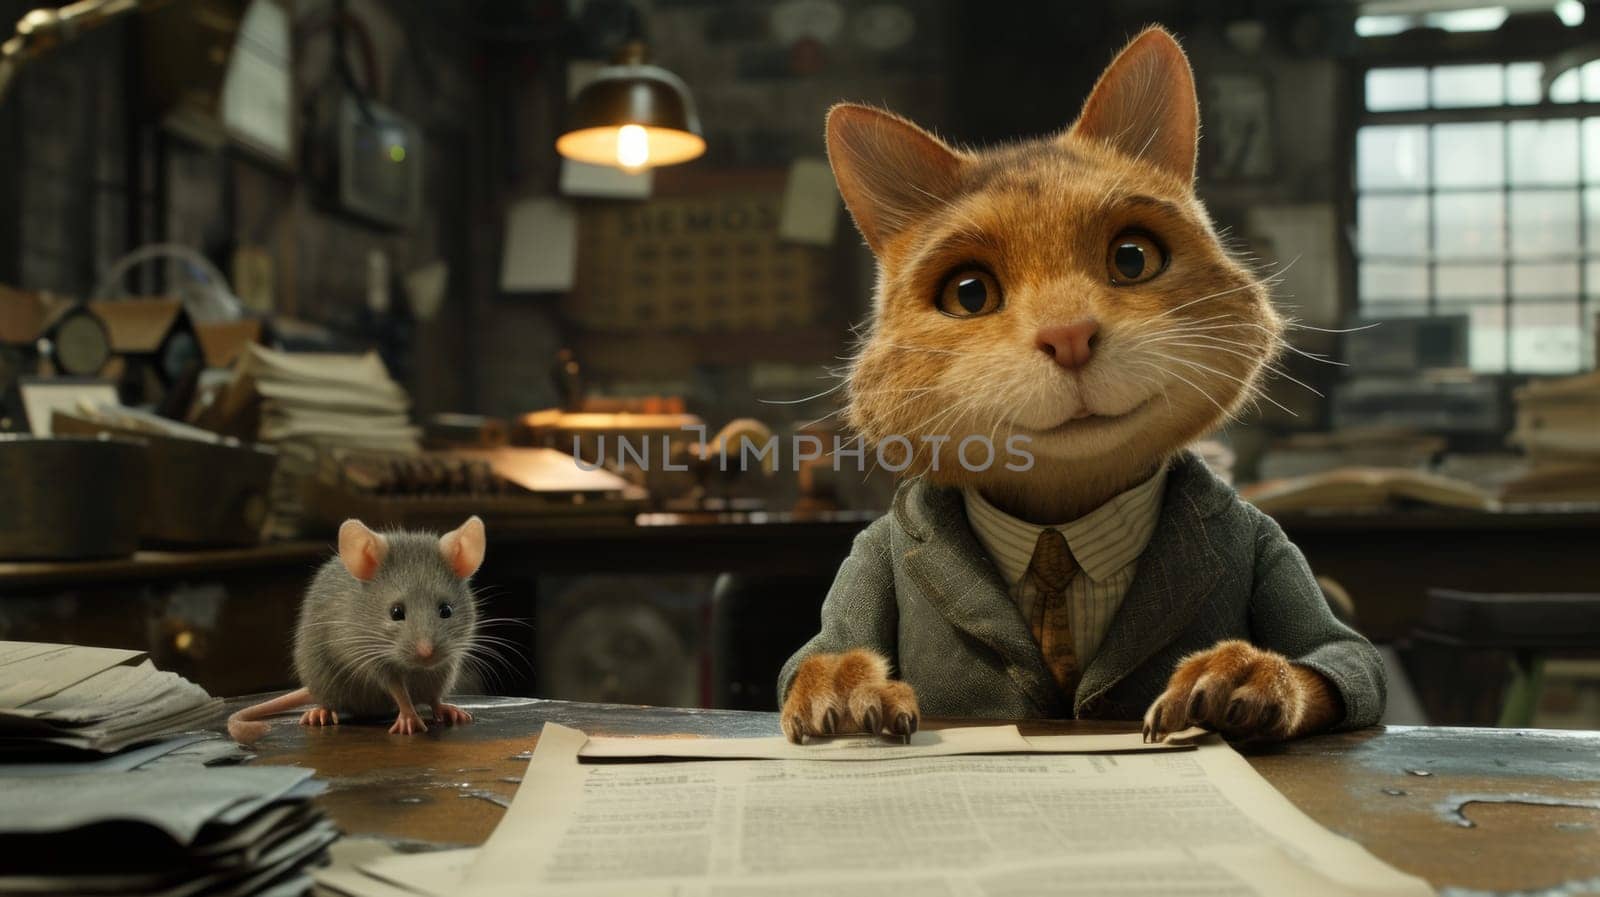 A cat in a suit and tie sitting at the desk with two mice, AI by starush